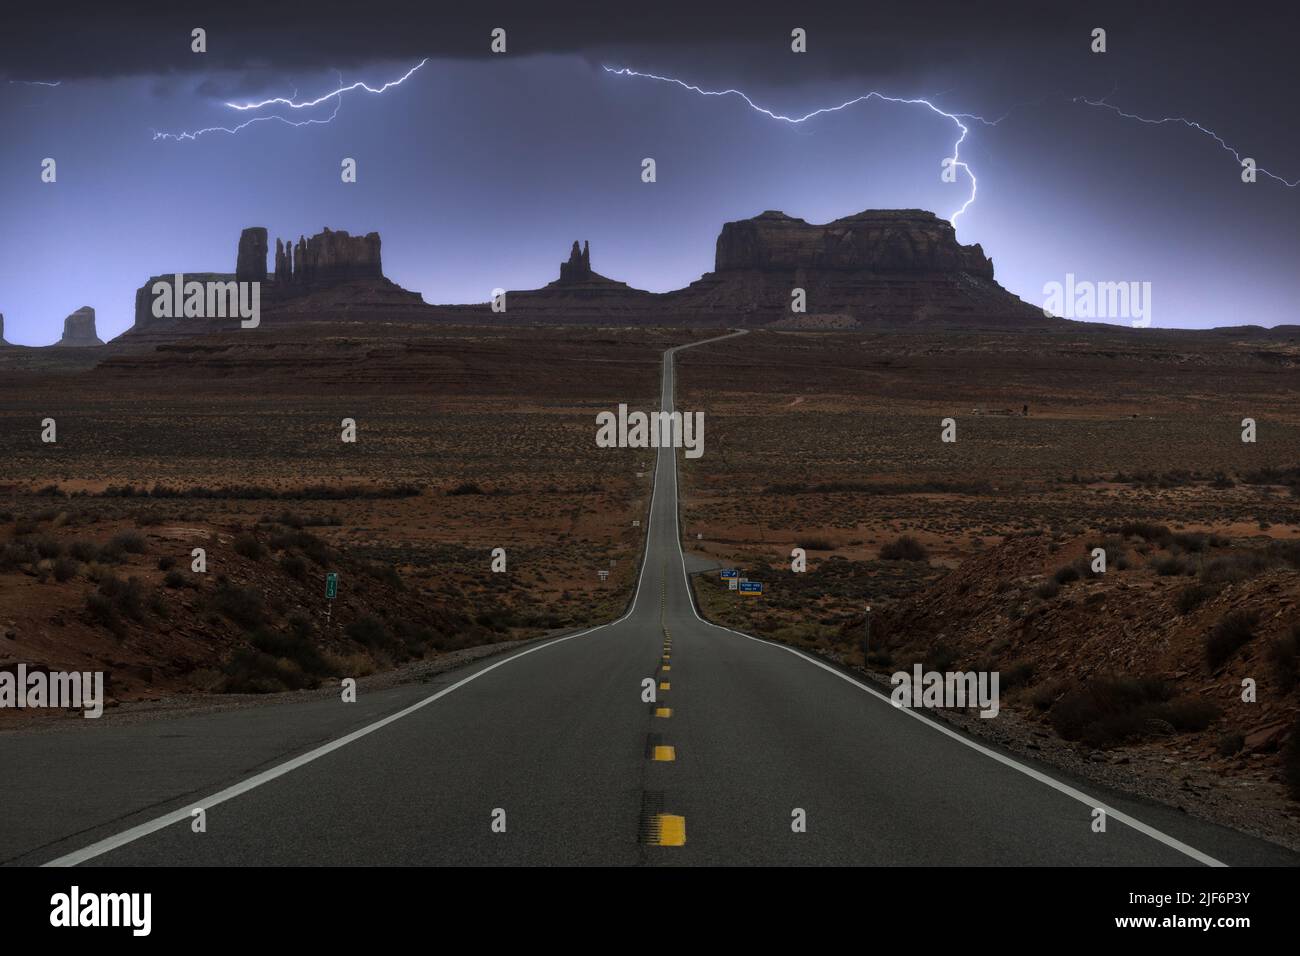 Breathtaking scenery of butte rocky outcrop formations under thunderstorm sky with clouds in between asphalt highway in Monument Valley Navajo Tribal Stock Photo